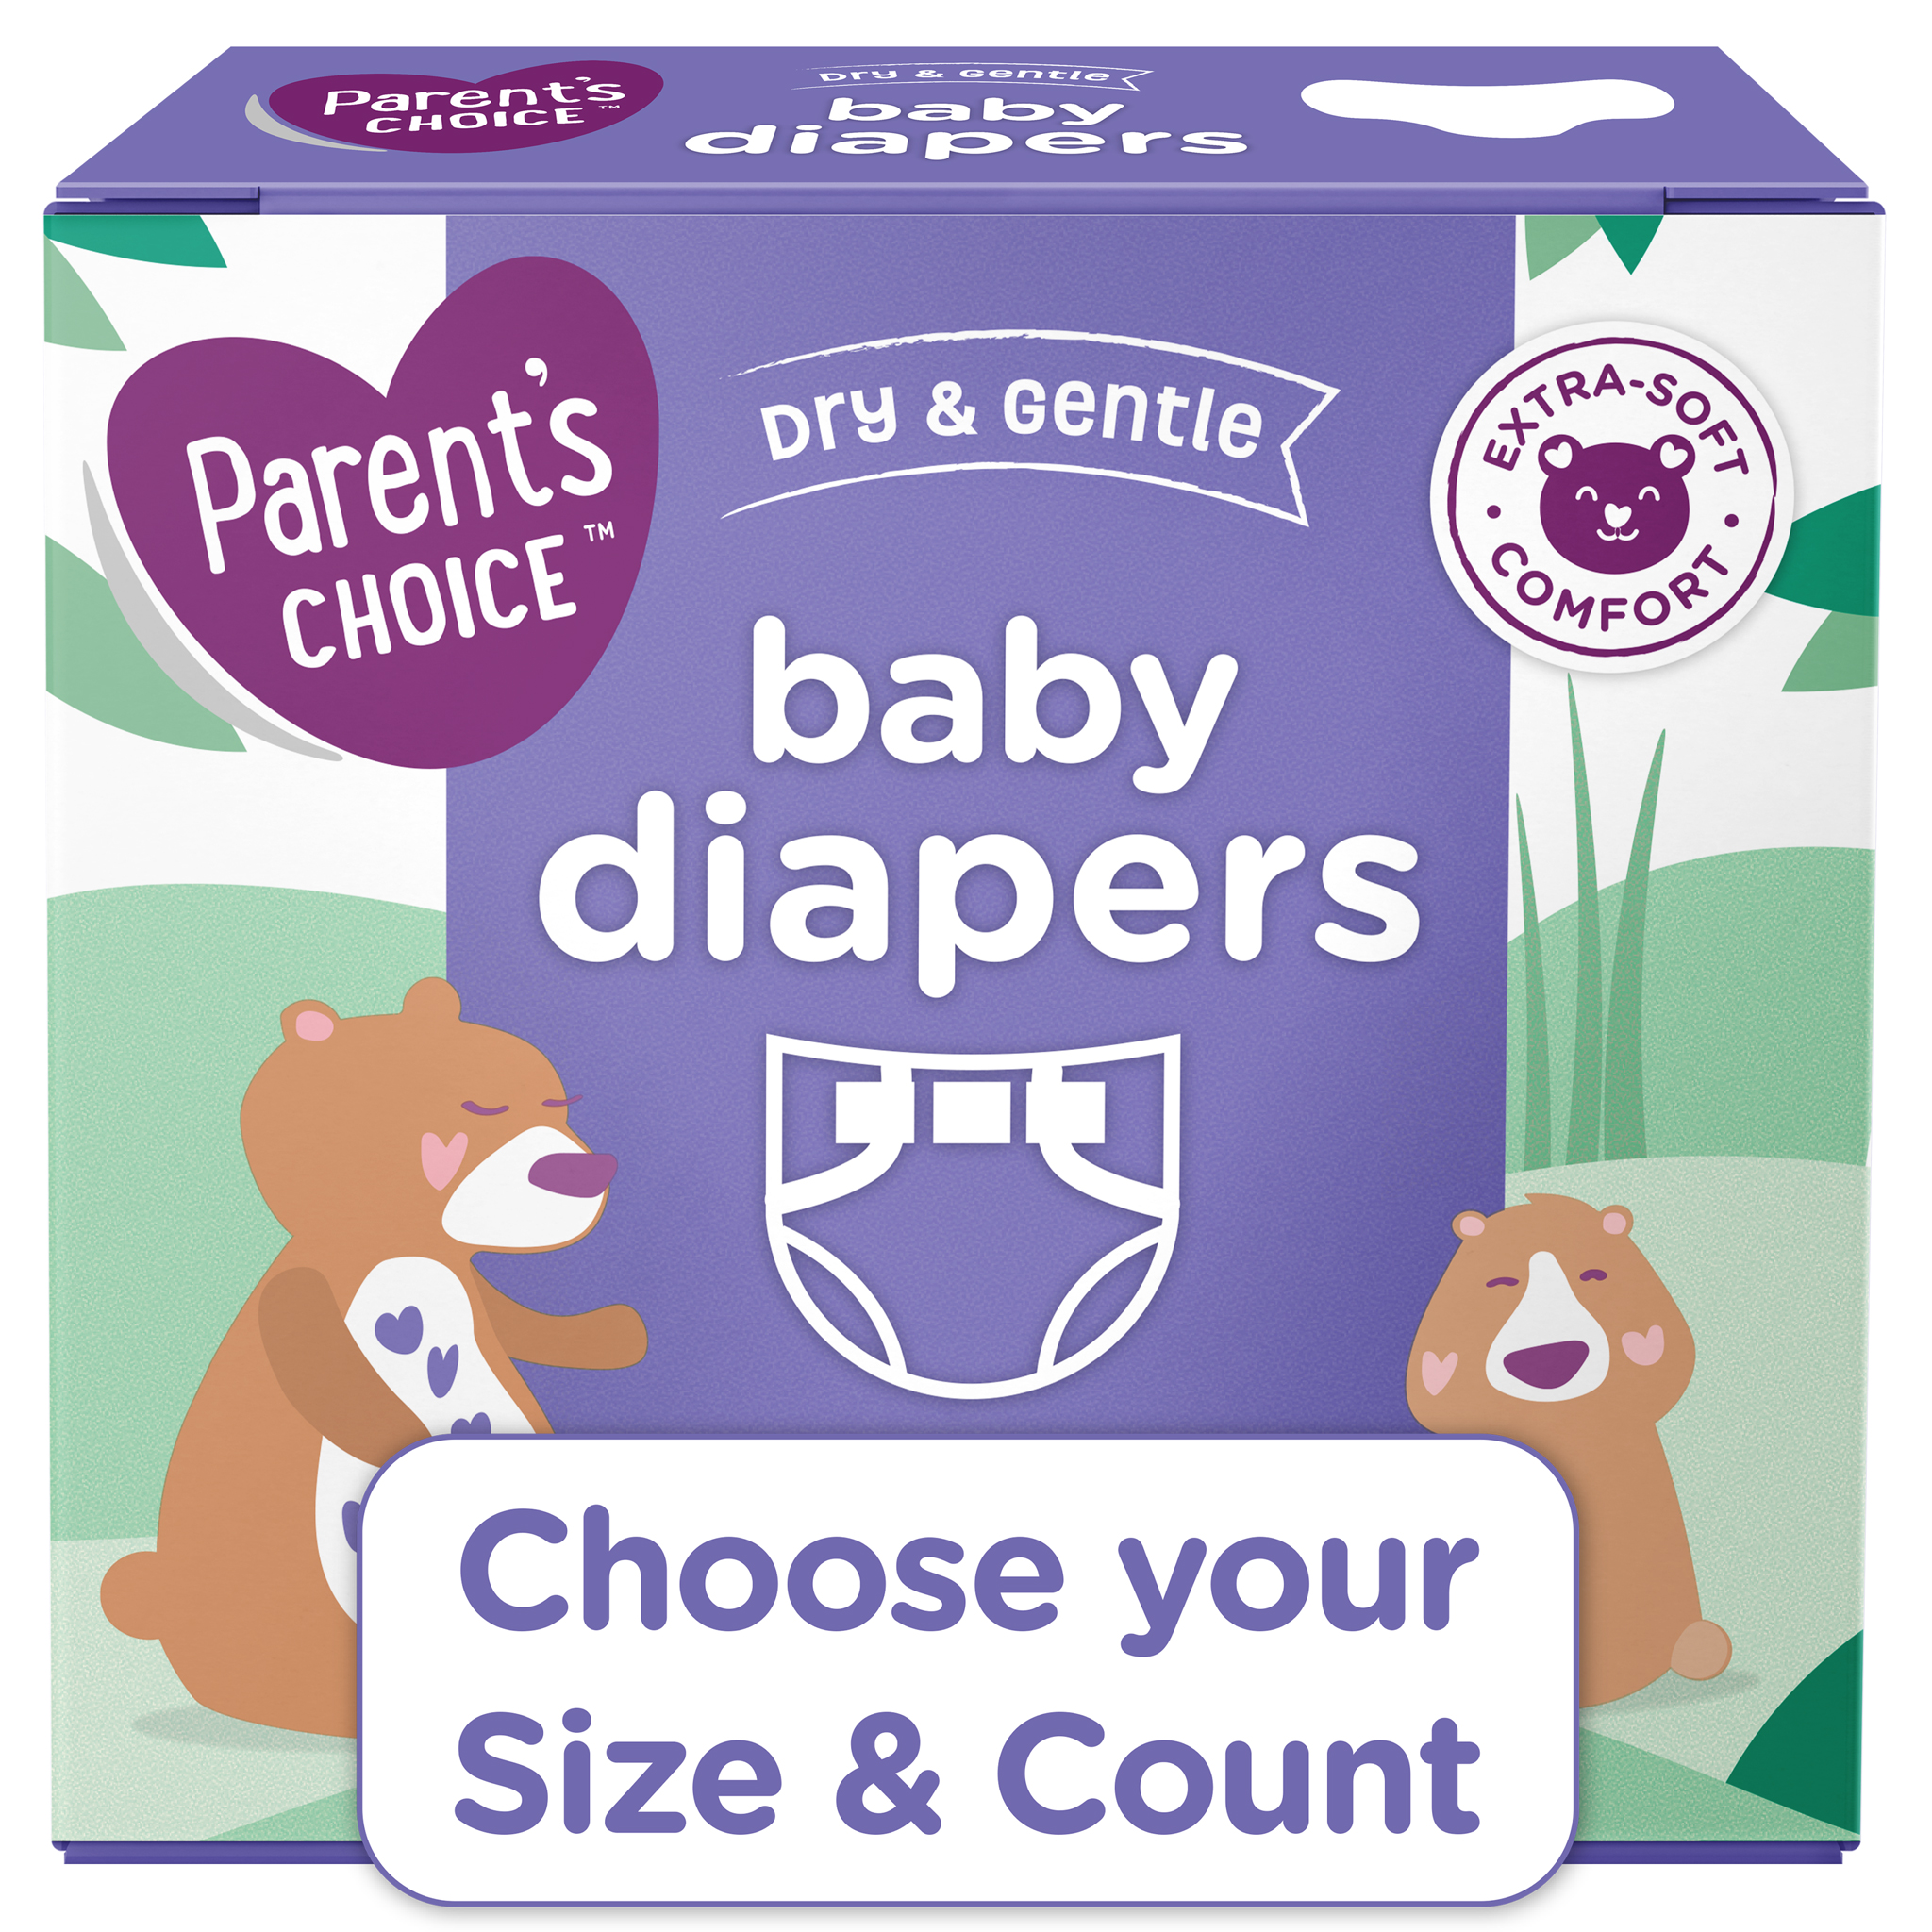 Parent's Choice Diapers (Choose Your Size & Count) - image 1 of 14